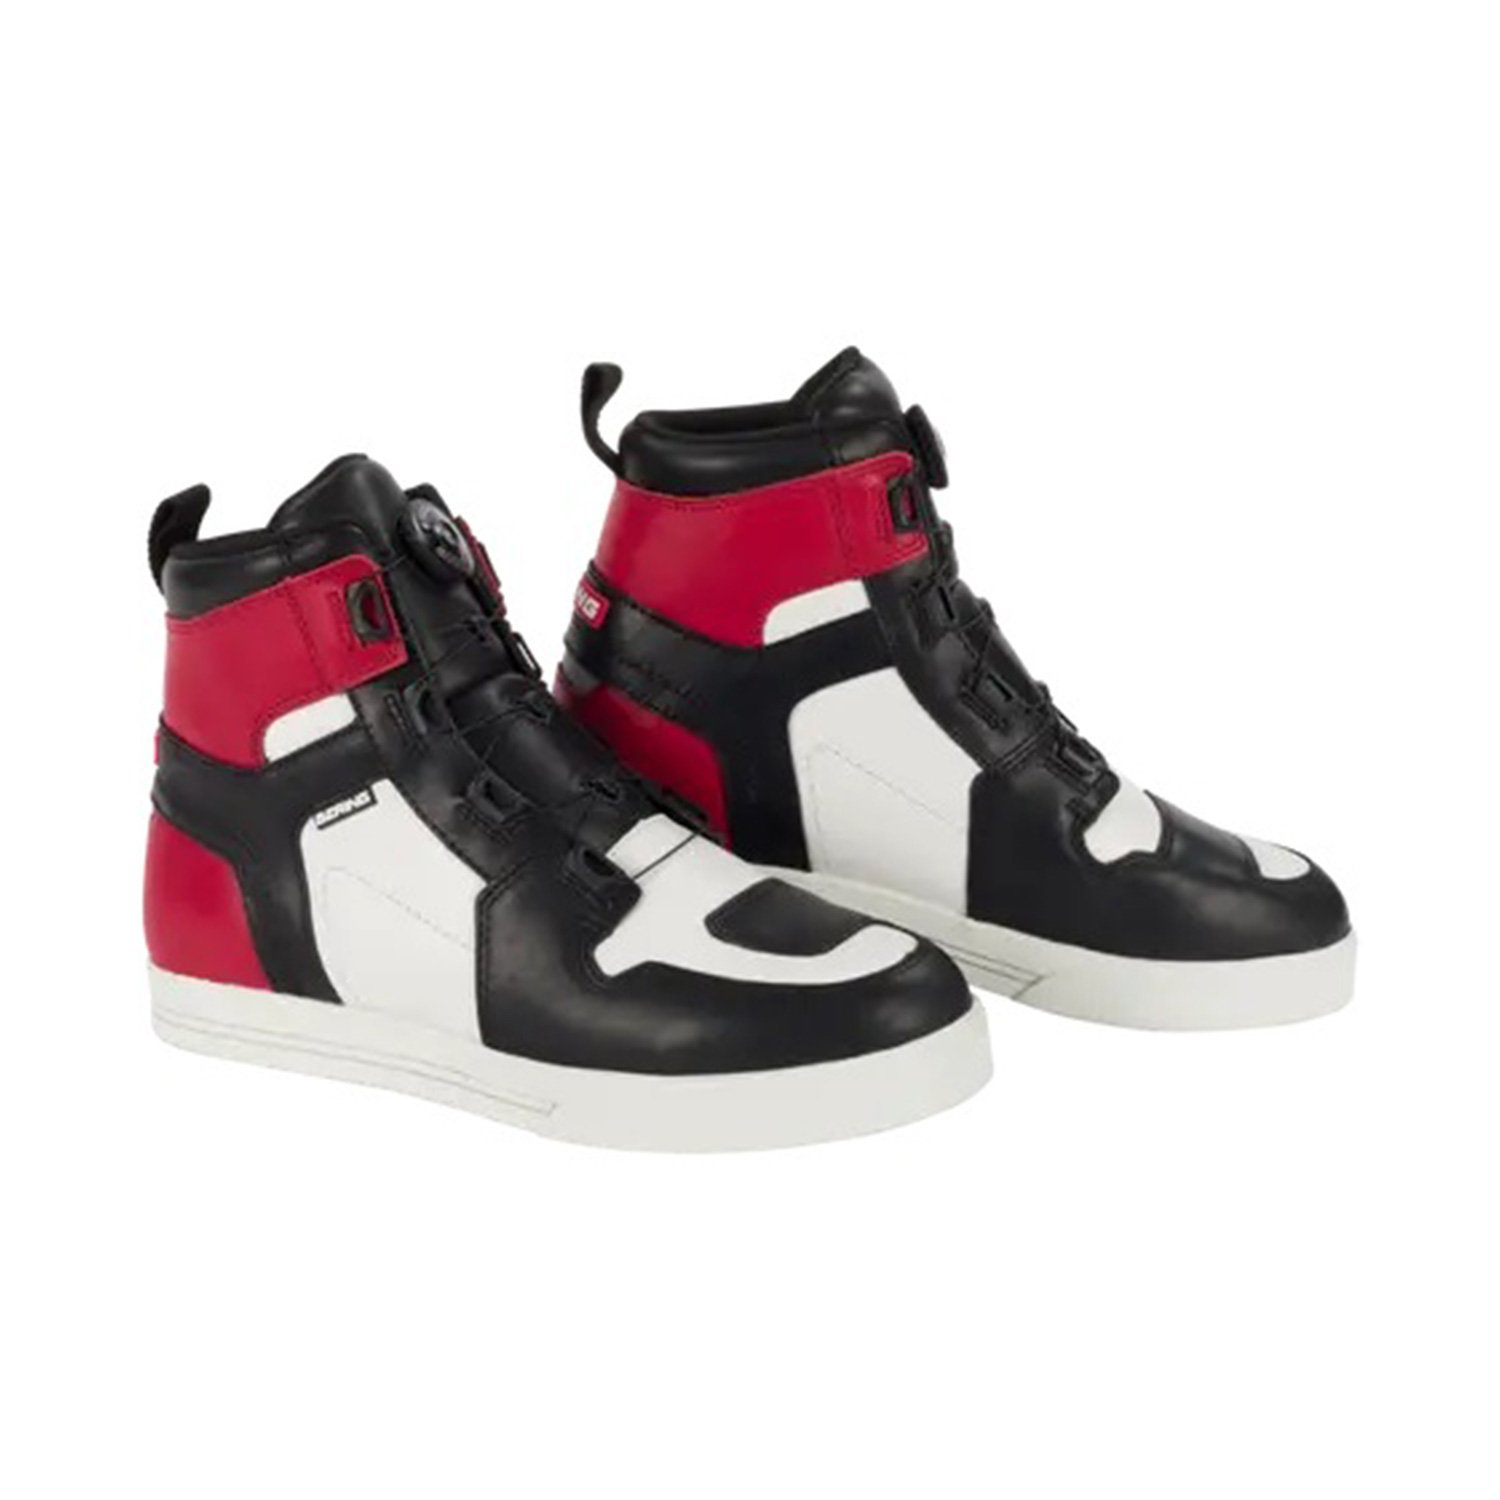 Image of Bering Sneakers Reflex A-Top Black White Red Talla 45